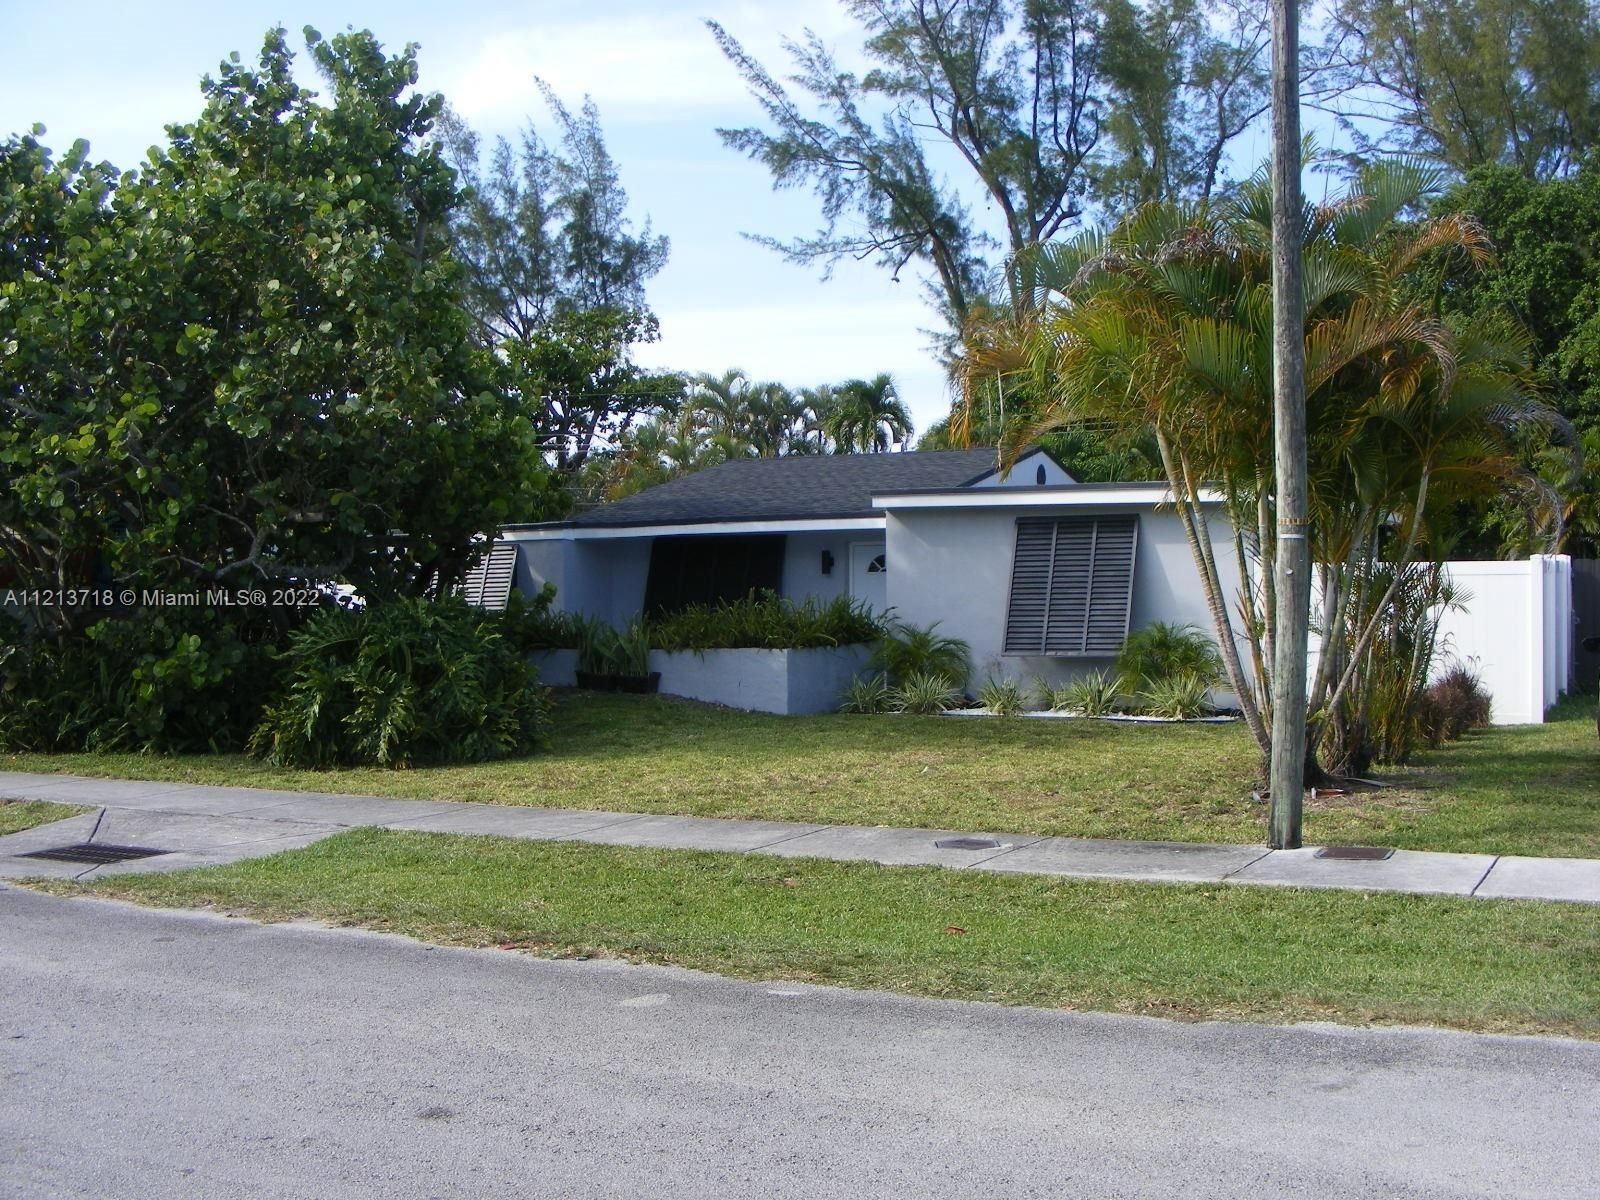 Real estate property located at 123 Miami Gardens Rd, Broward County, West Park, FL